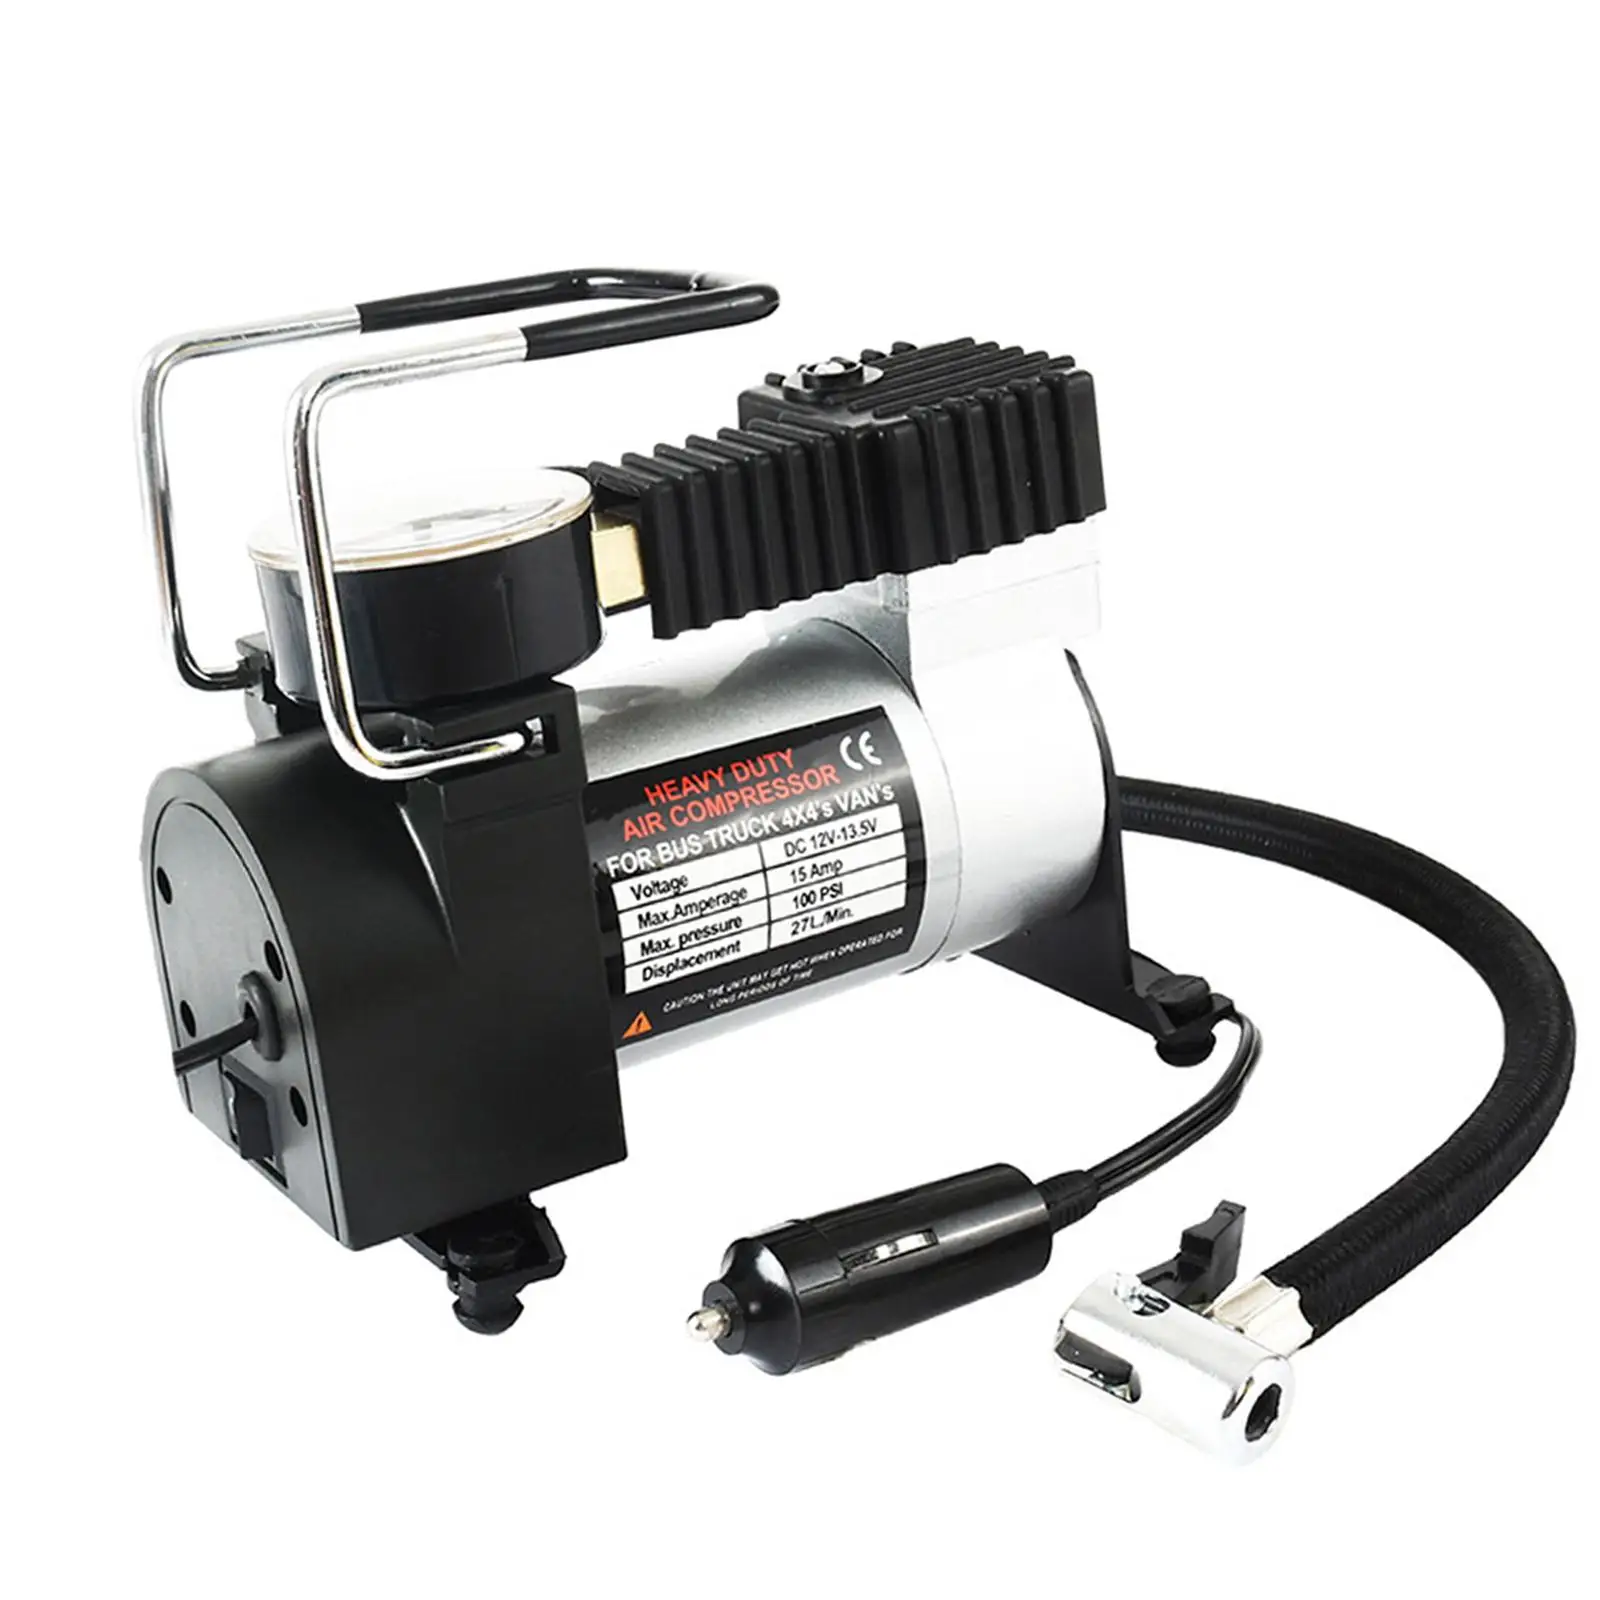 Tire Inflator Automotive Electric Inflatable Pump Auto Accessories Electric Air Compressor Tire Electric Inflator for Van